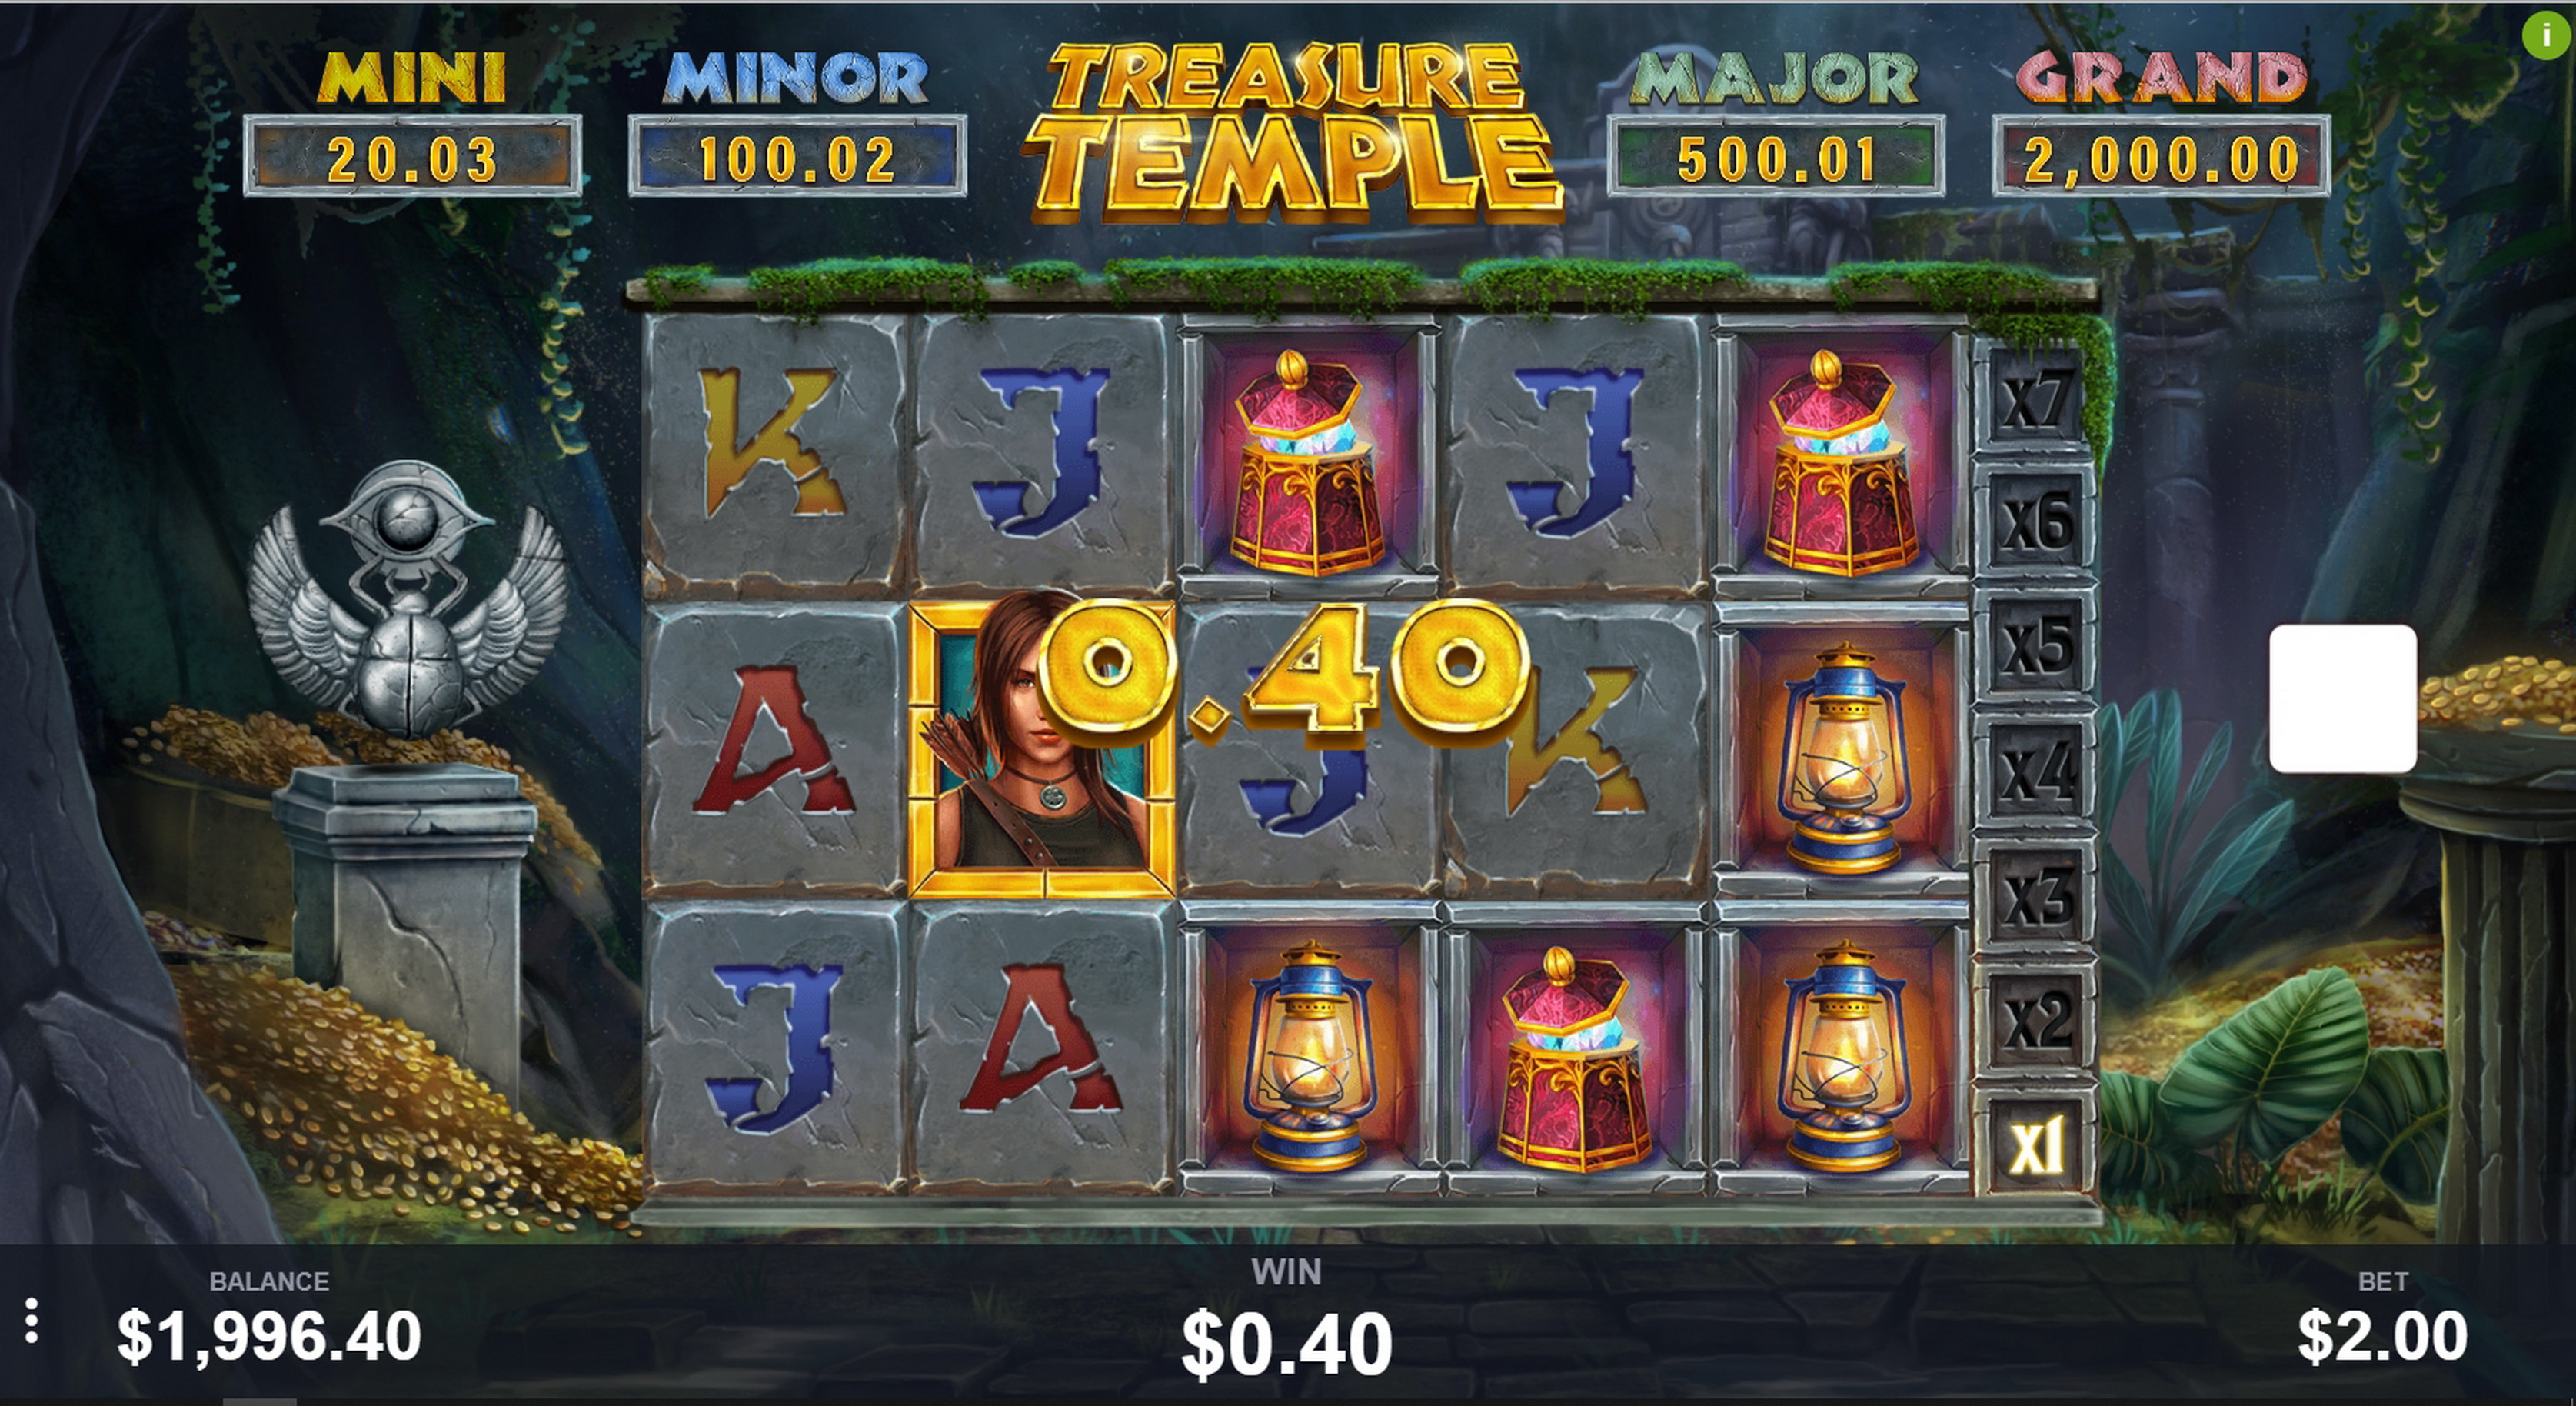 Win Money in Treasure Temple Free Slot Game by PariPlay